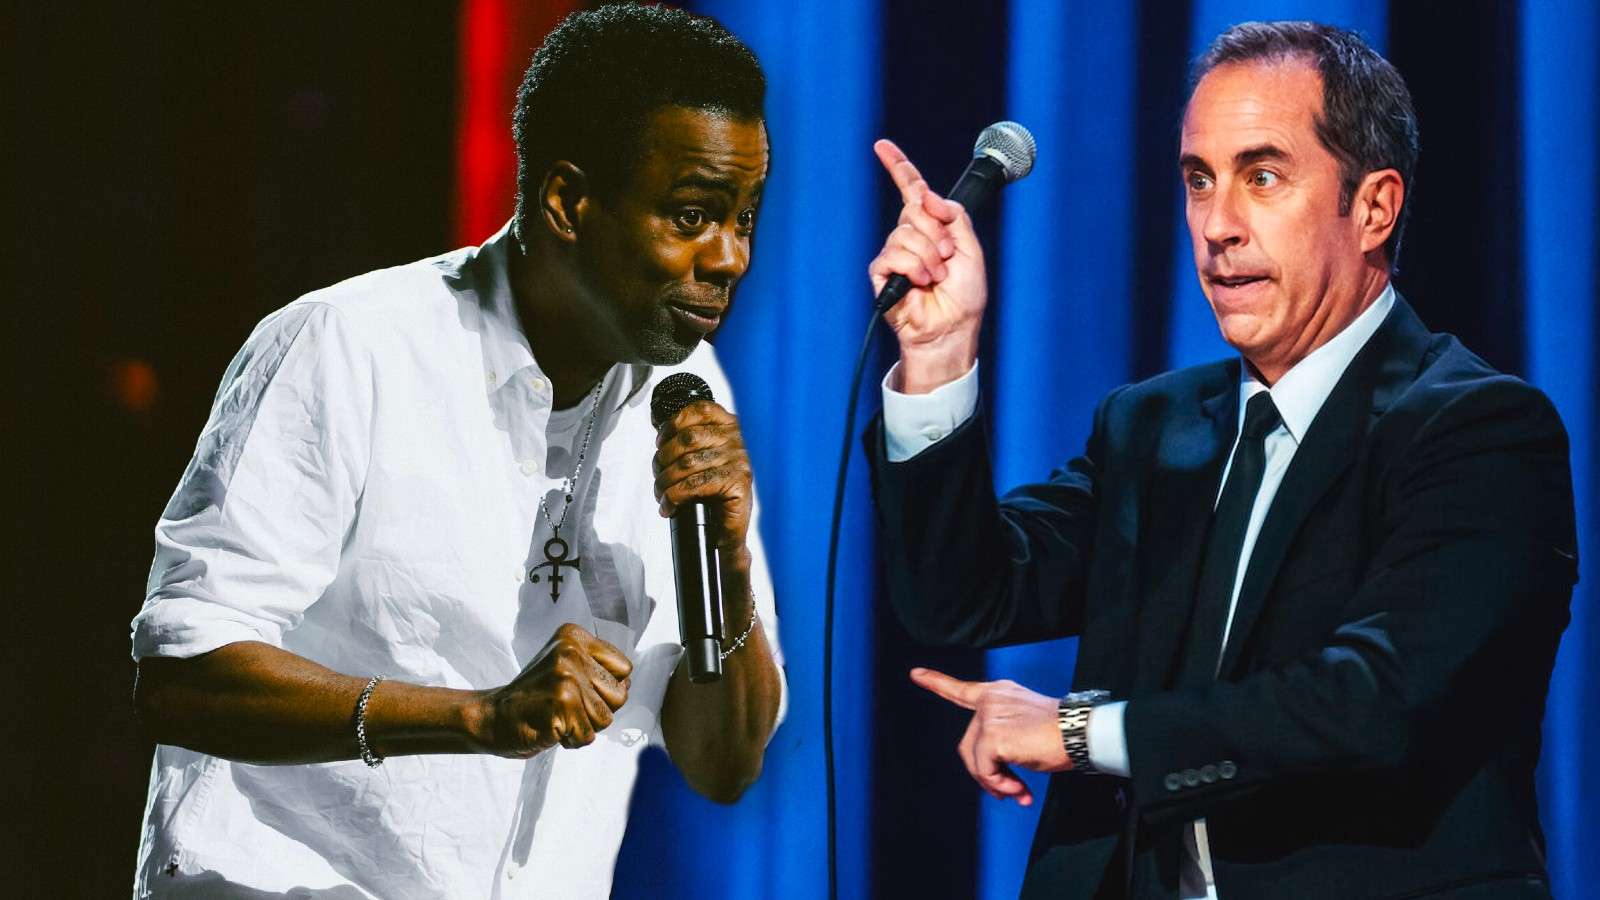 Chris Rock and Jerry Seinfeld in their Netflix stand-up comedy specials